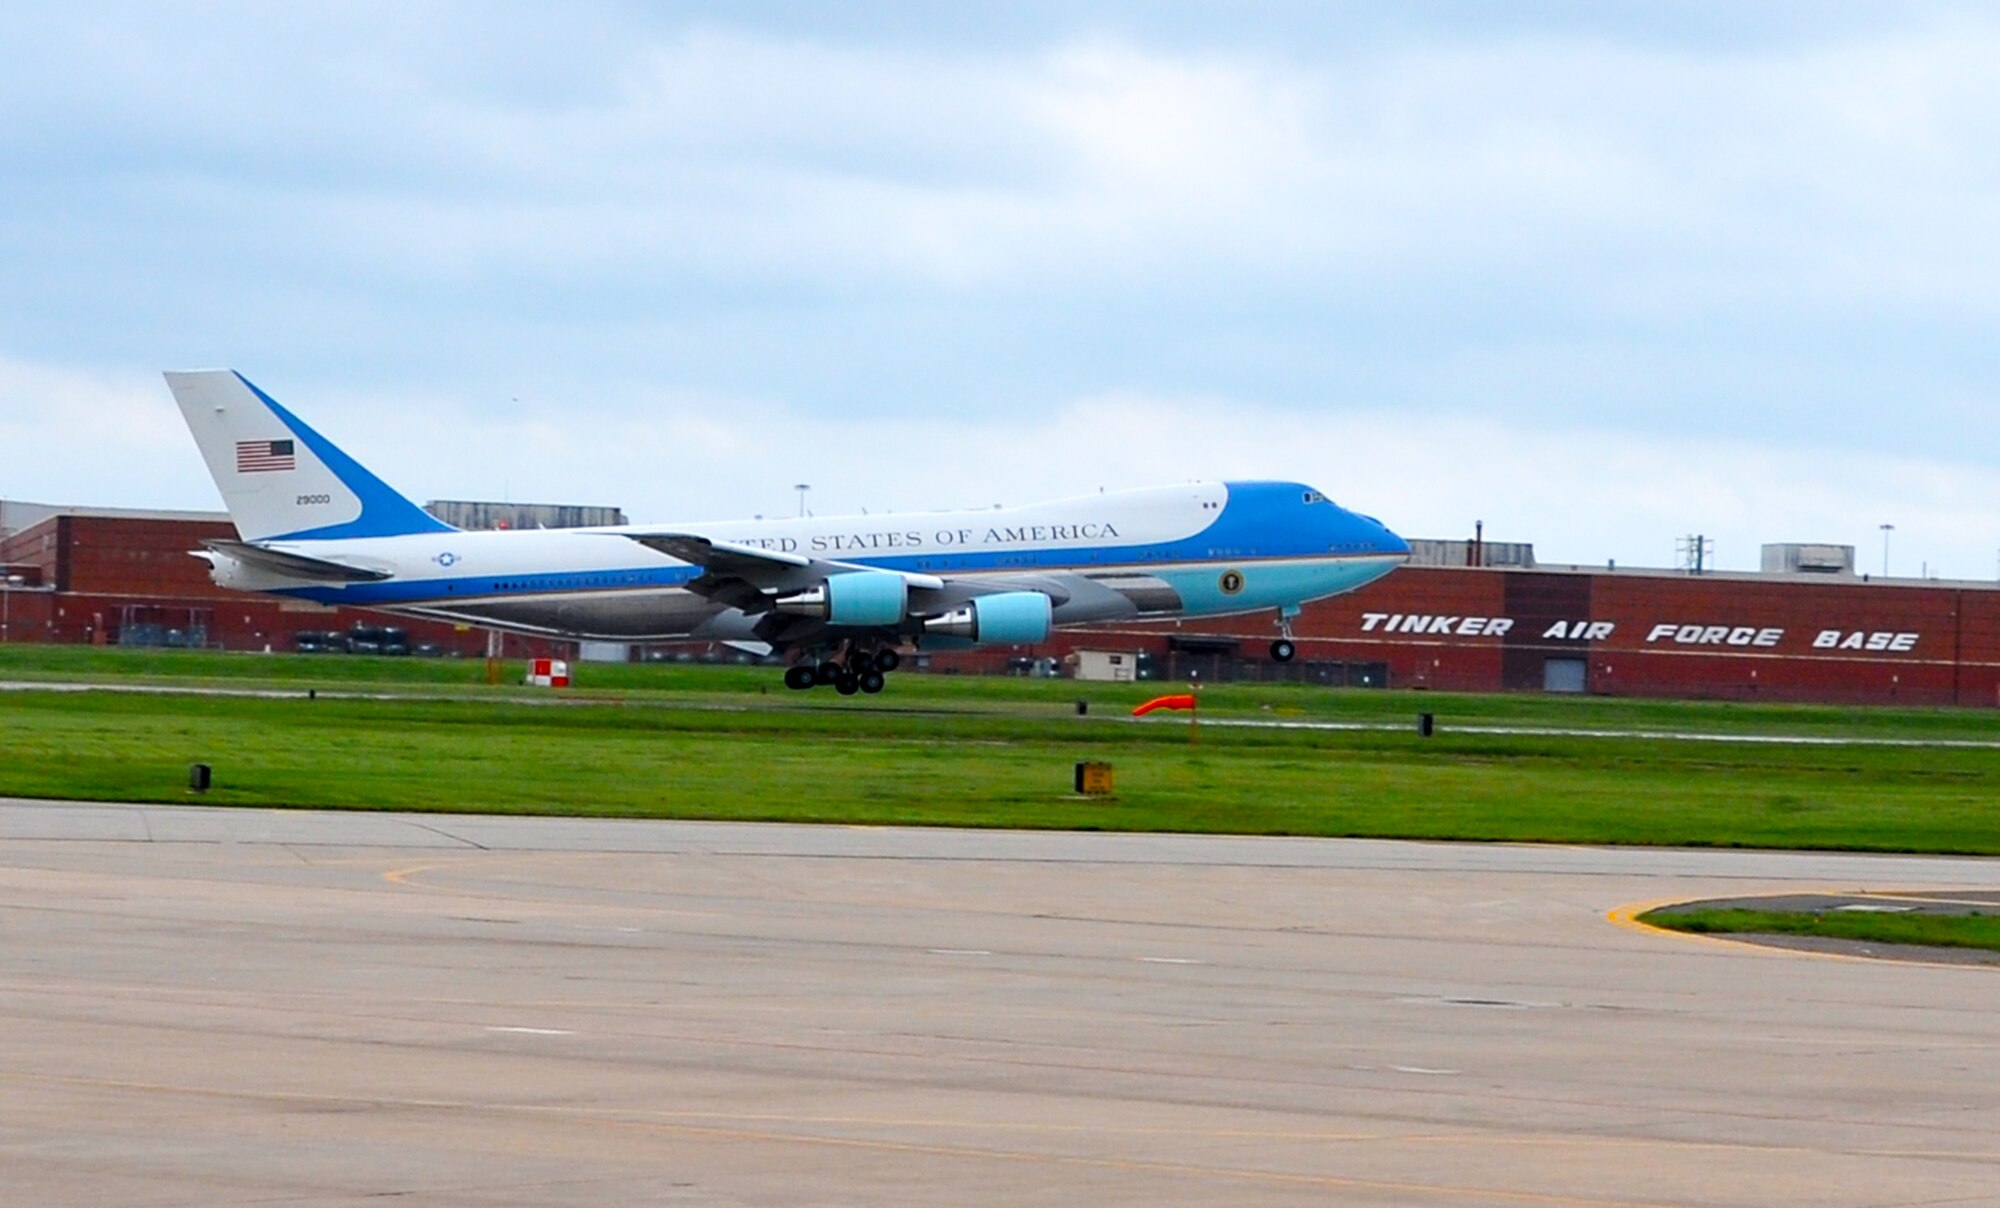 Air Force One touches down at Tinker Air Force Base May 26, 2013.  President Barack Obama was here on a scheduled visit to tour the tornado ravaged Moore Okla., area after an EF-5 twister hit Monday, May 20, 2013.  (U.S. Air Force Photo by Senior Airman Mark Hybers)